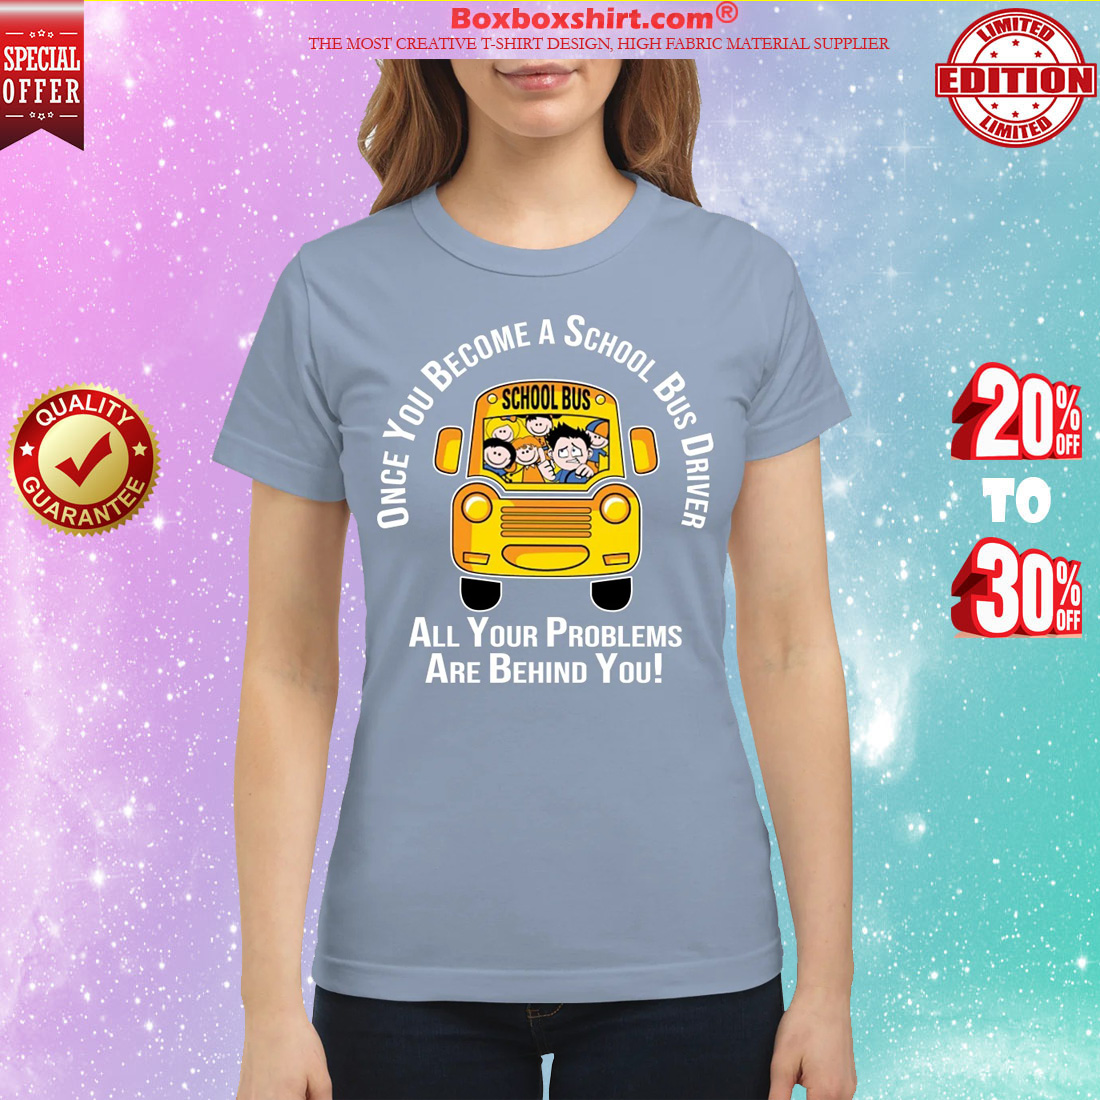 Once you become a school bus driver all your problems are behind you classic shirt